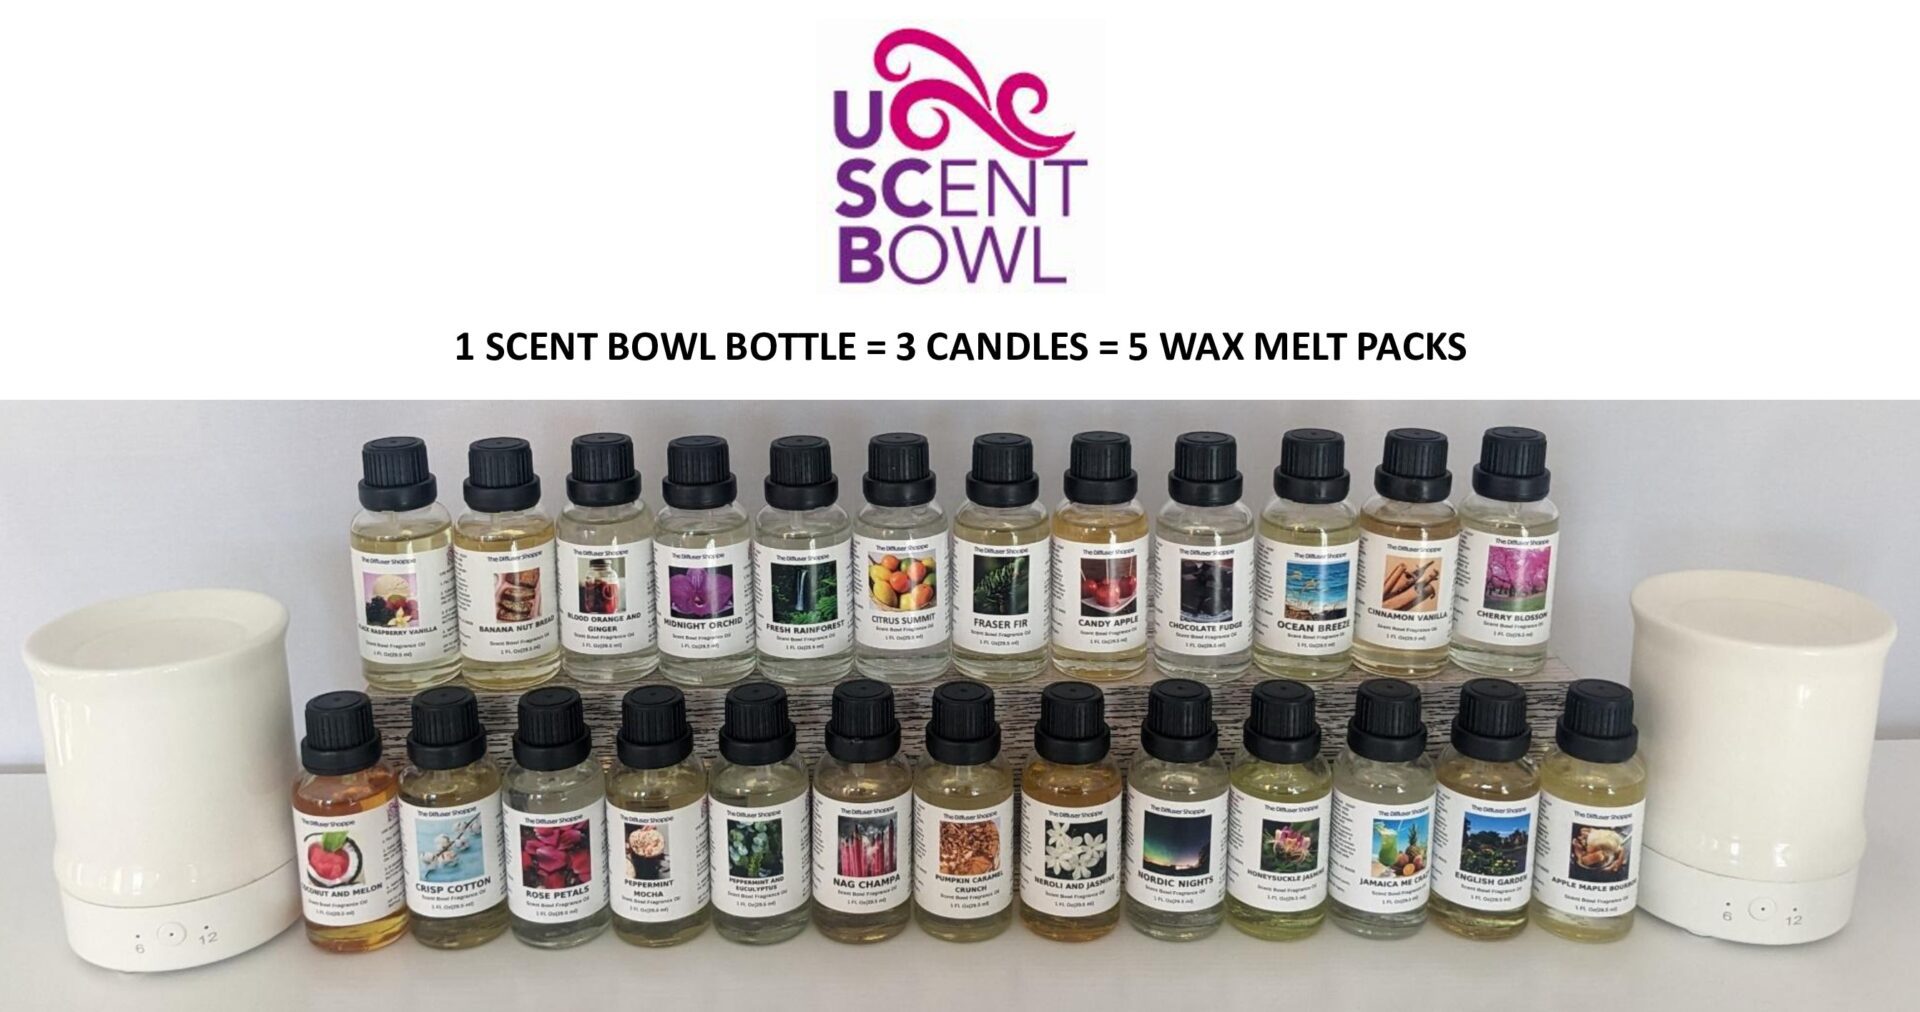 A bunch of different candles and wax melts in bottles